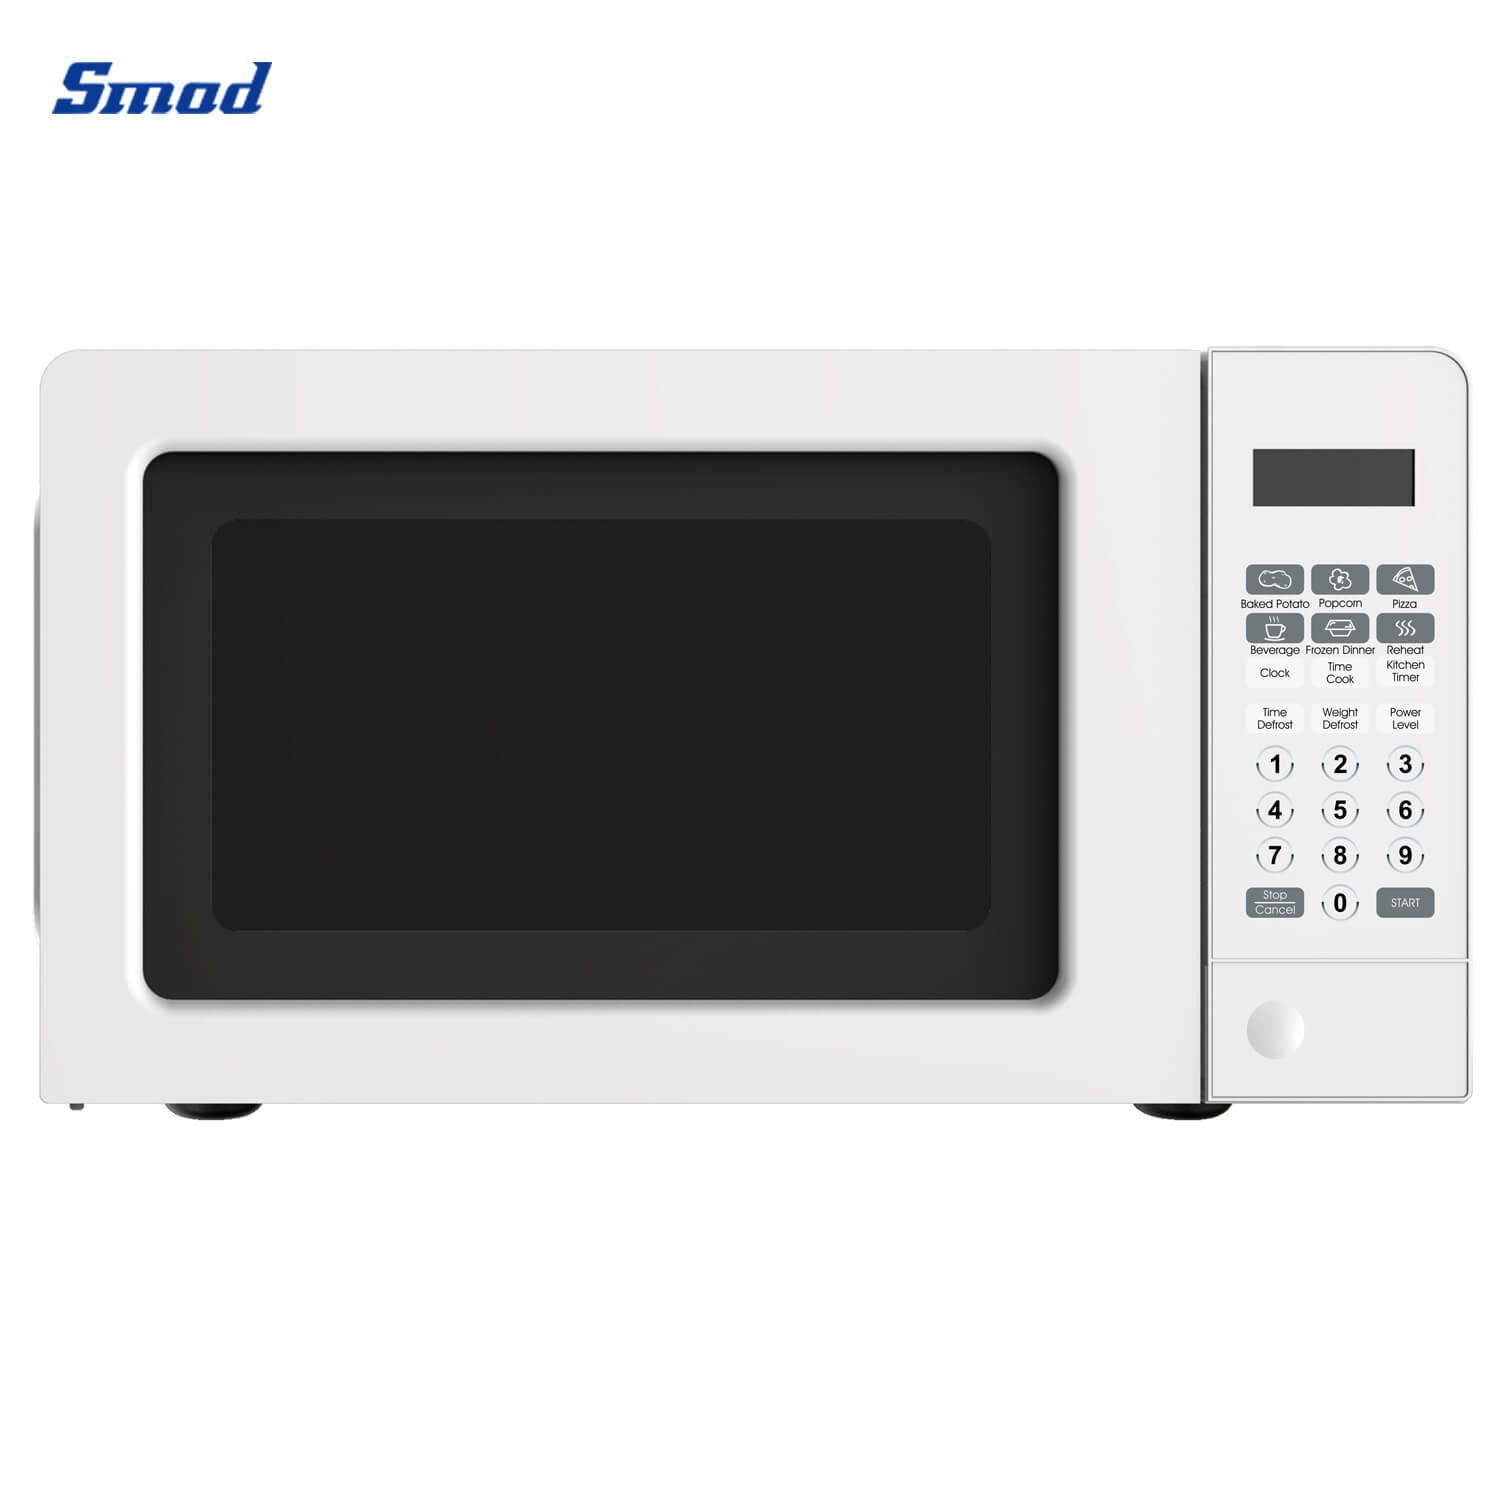 Smad 20L 700W Digital Control Countertop Microwave Oven with Grill